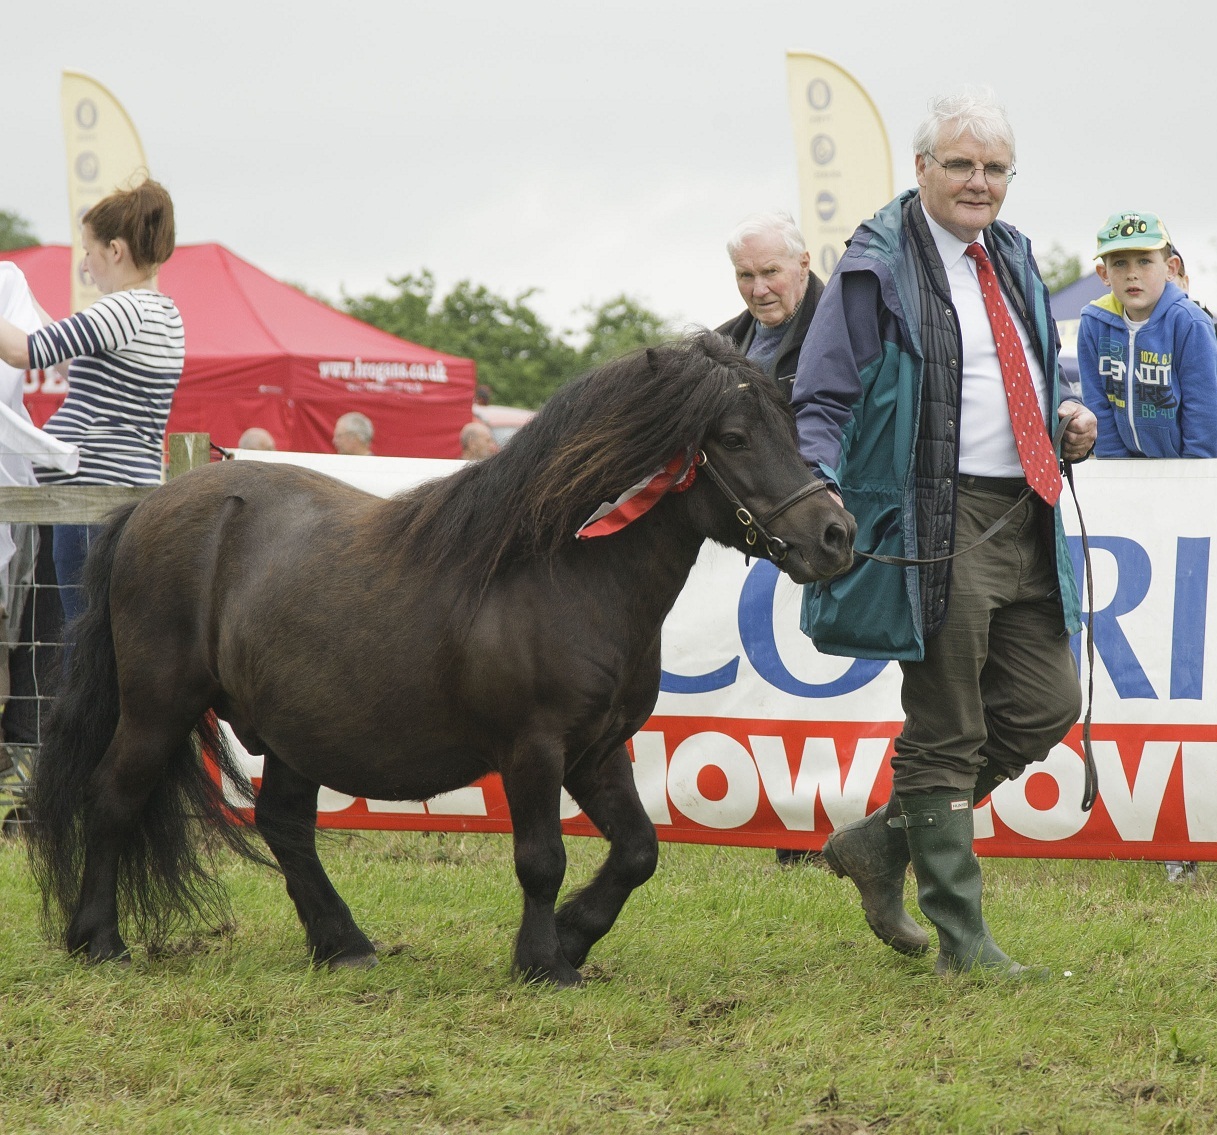 Angus Show 14. Courier Frming Editor Ewan Pate seen leading his Pony in the parade. His previous outing was at the Angus Show in Dundee in the mid fifties aged eight!